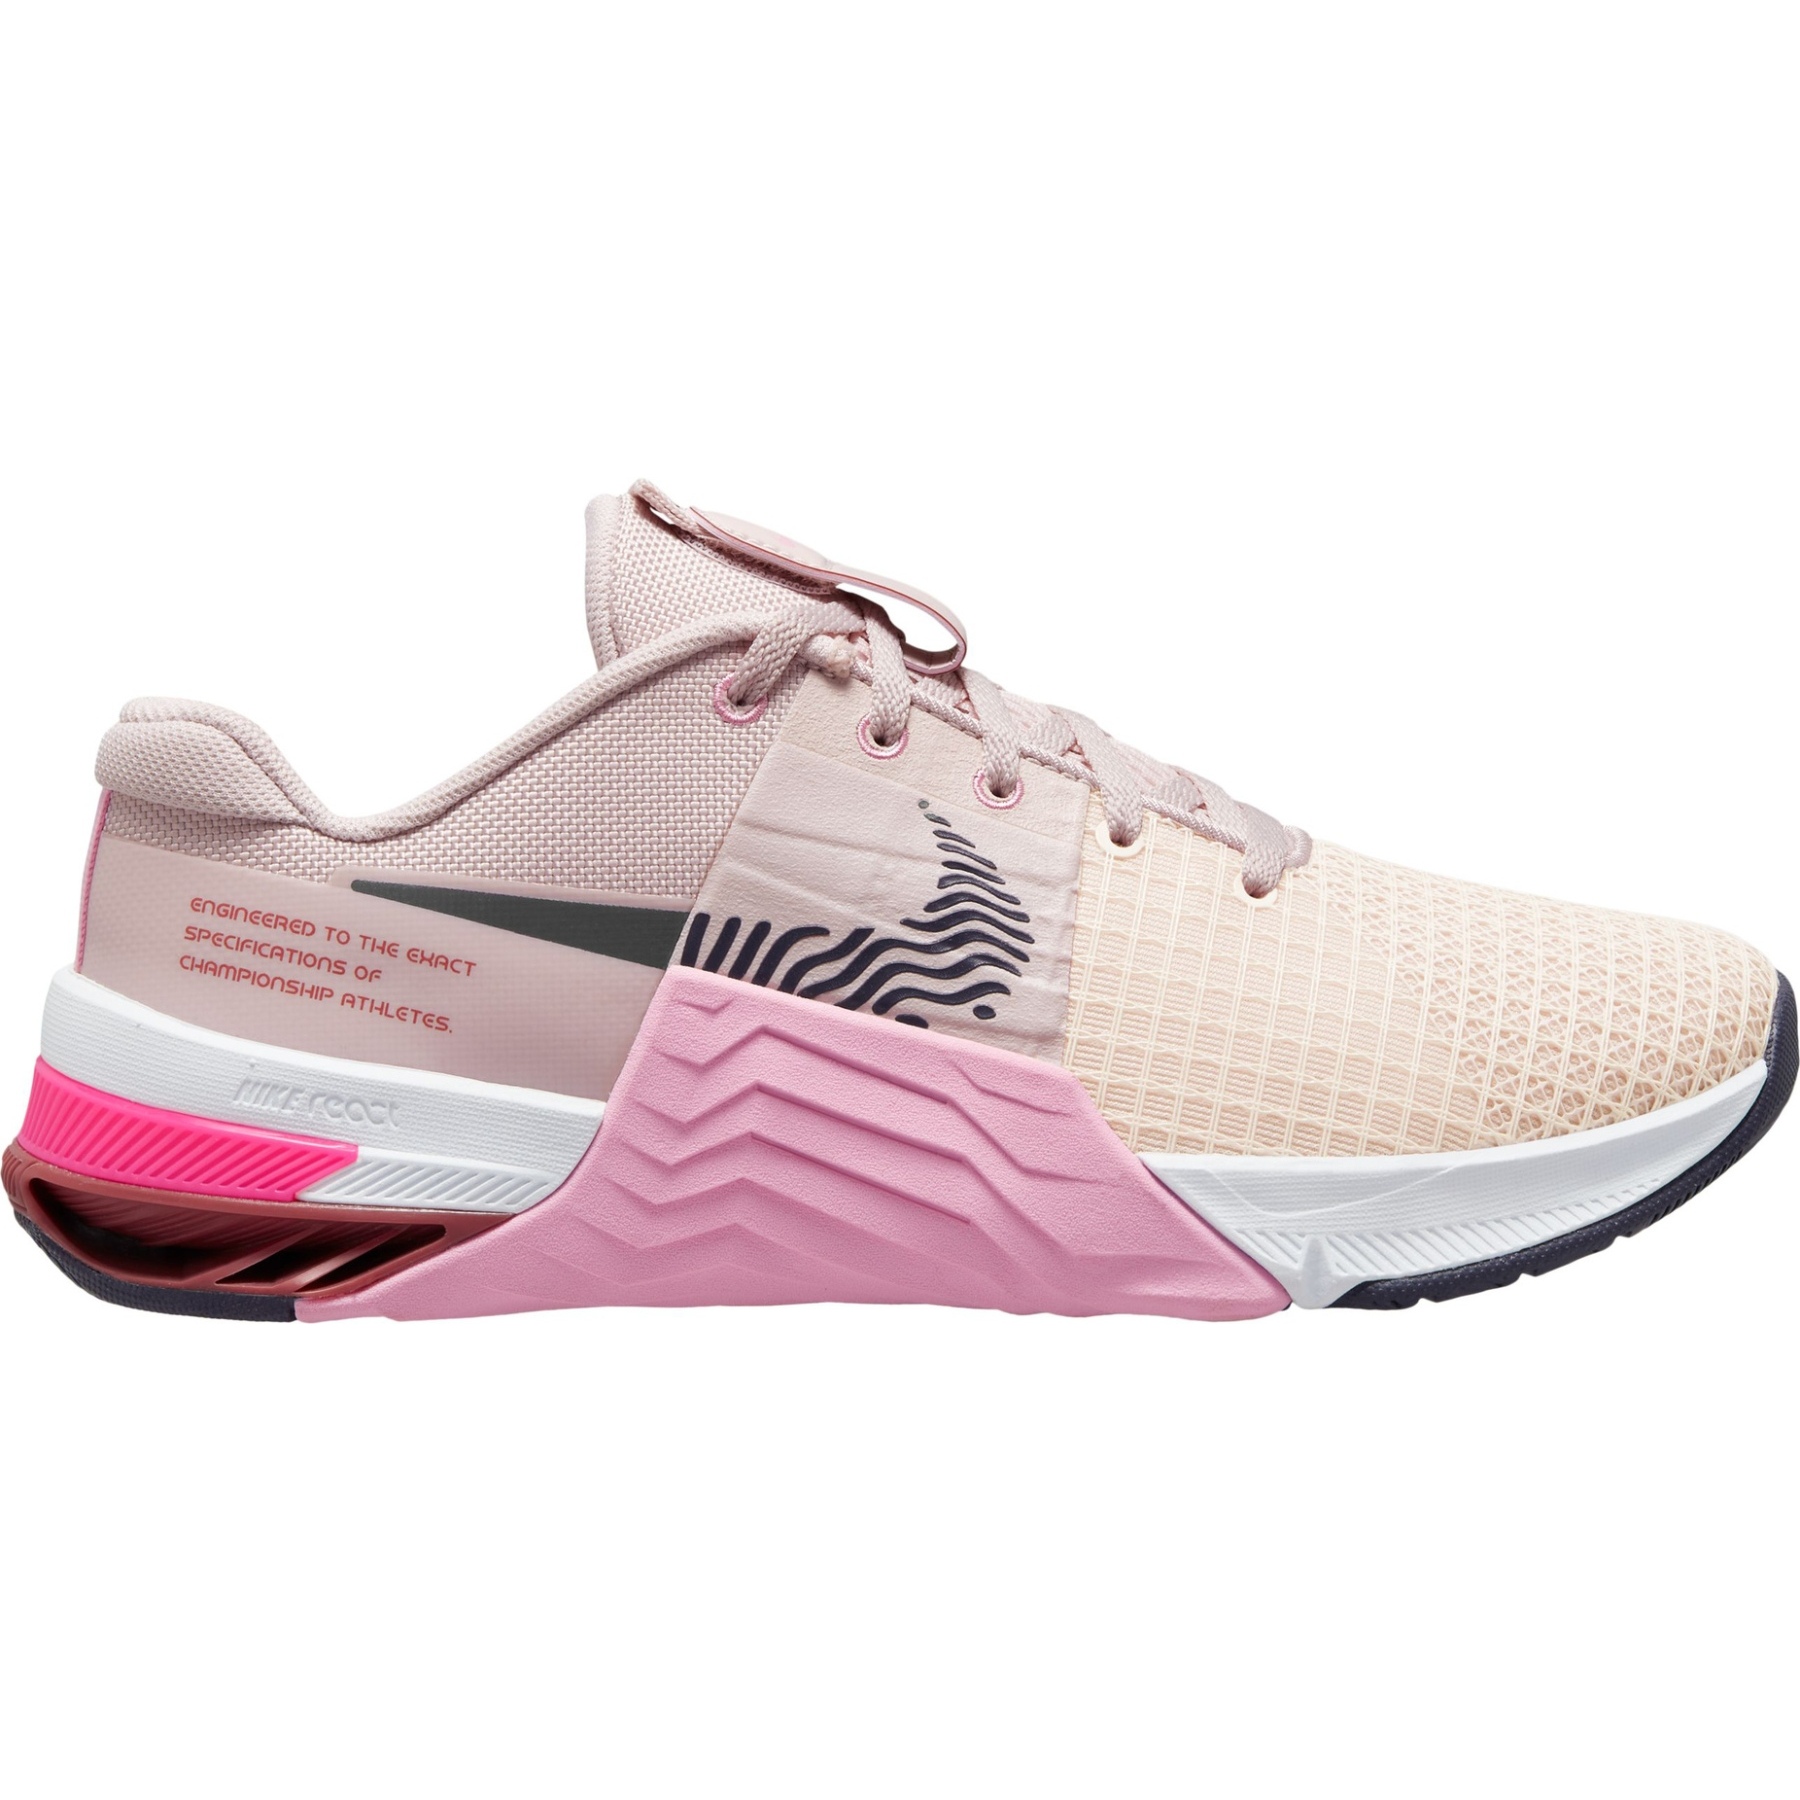 Vooruitgaan Vernauwd Nest Nike Metcon 8 Women's Running Shoes - barely rose/cave purple-pink rise  DO9327-600